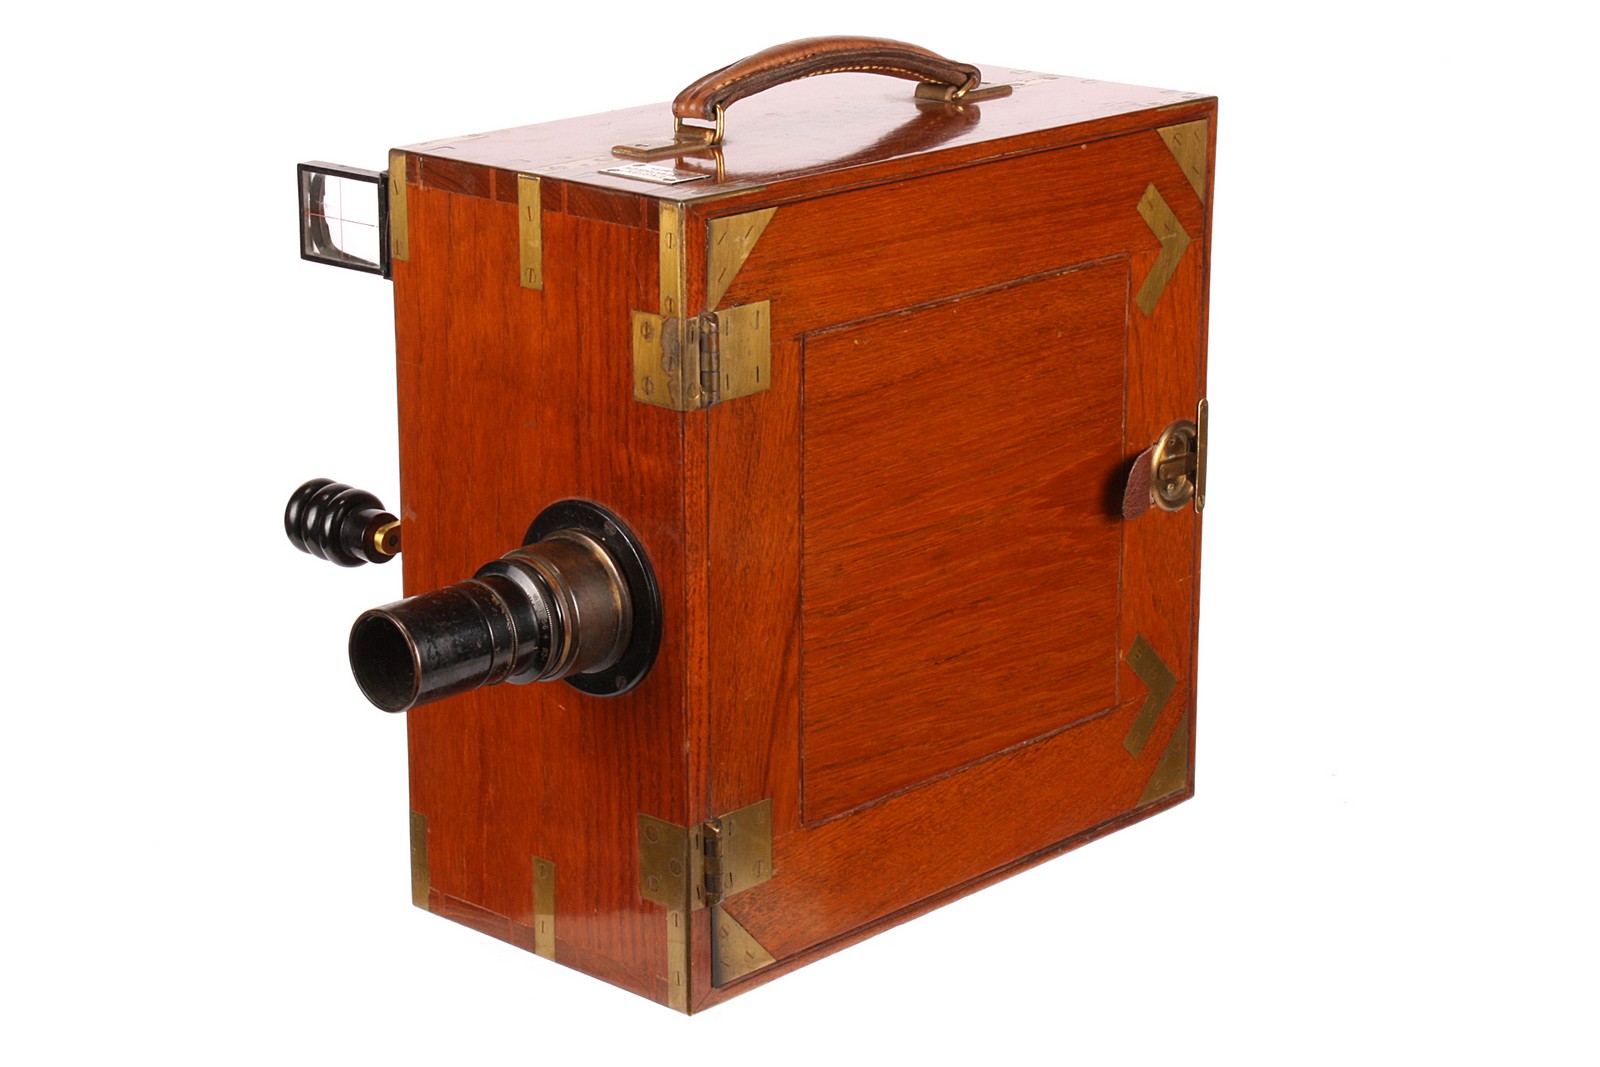 An Ensign Cinematograph Tropical 35mm Hand-Crank Camera, serial no. 343, c1914, polished brass bound